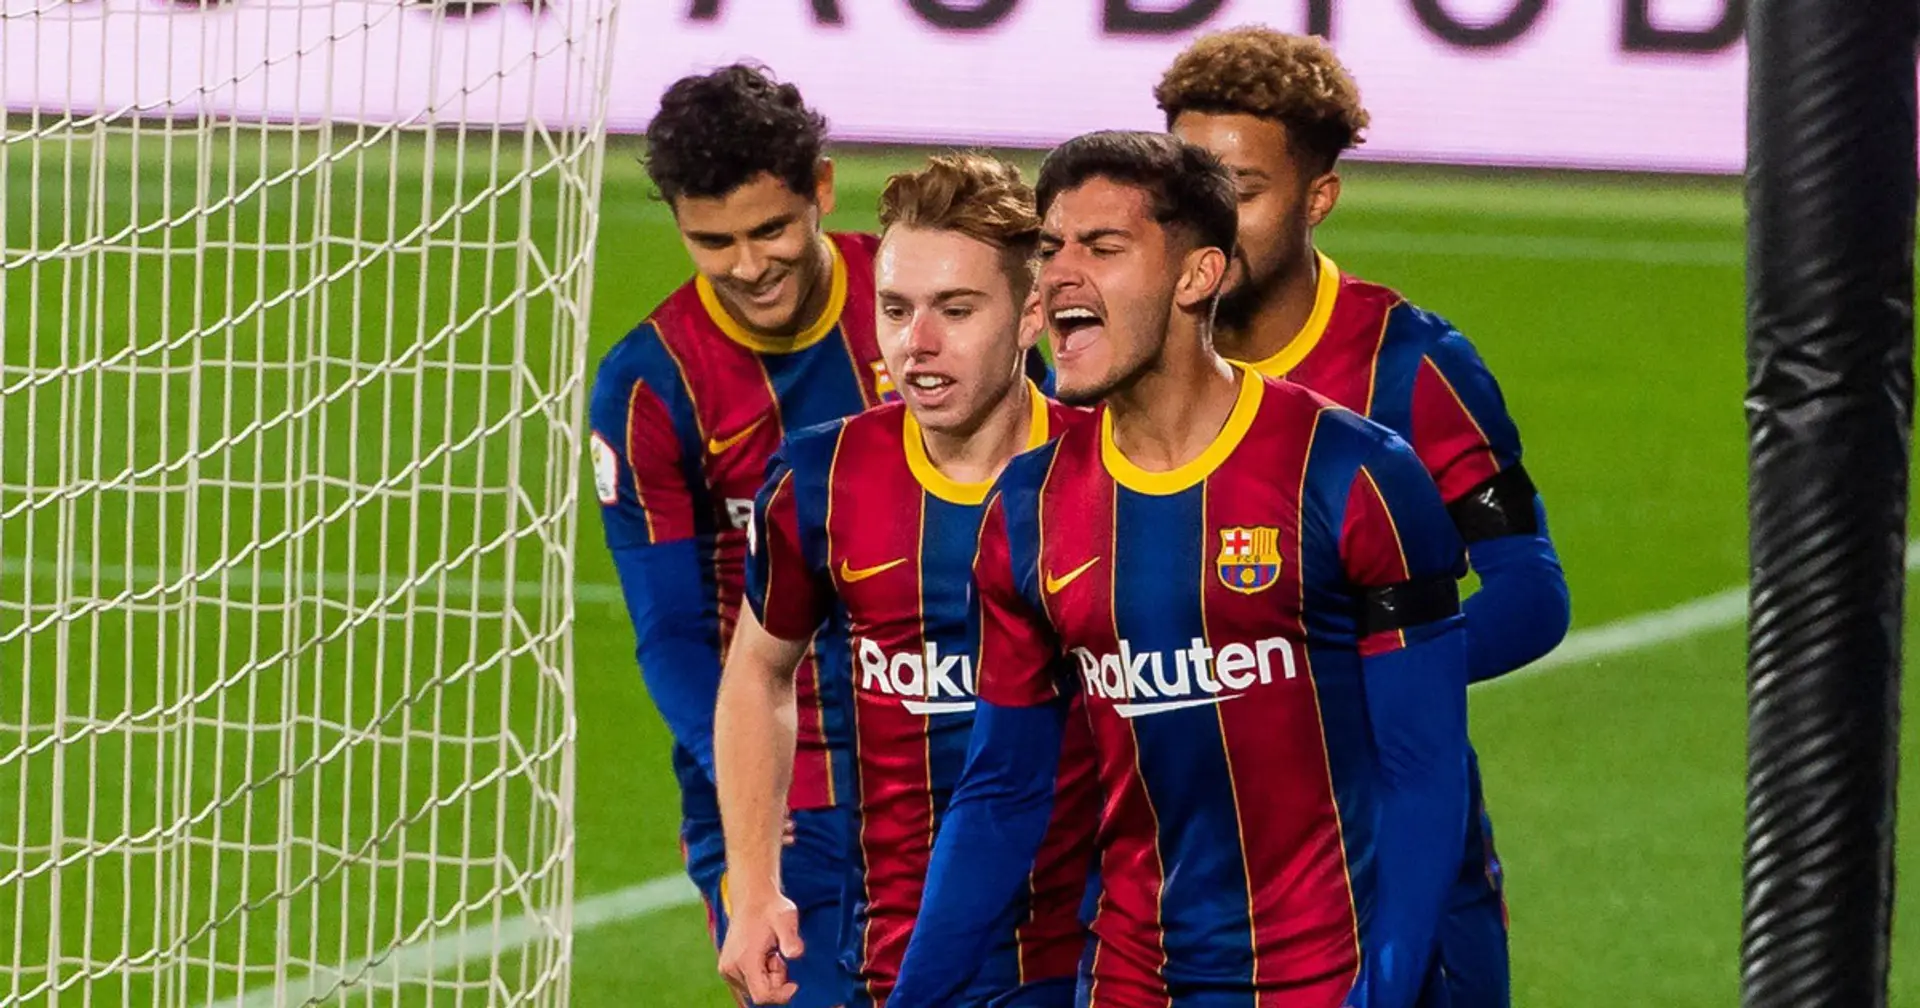 More good news: Barca B put end to winless streak as they beat Lleida (video)